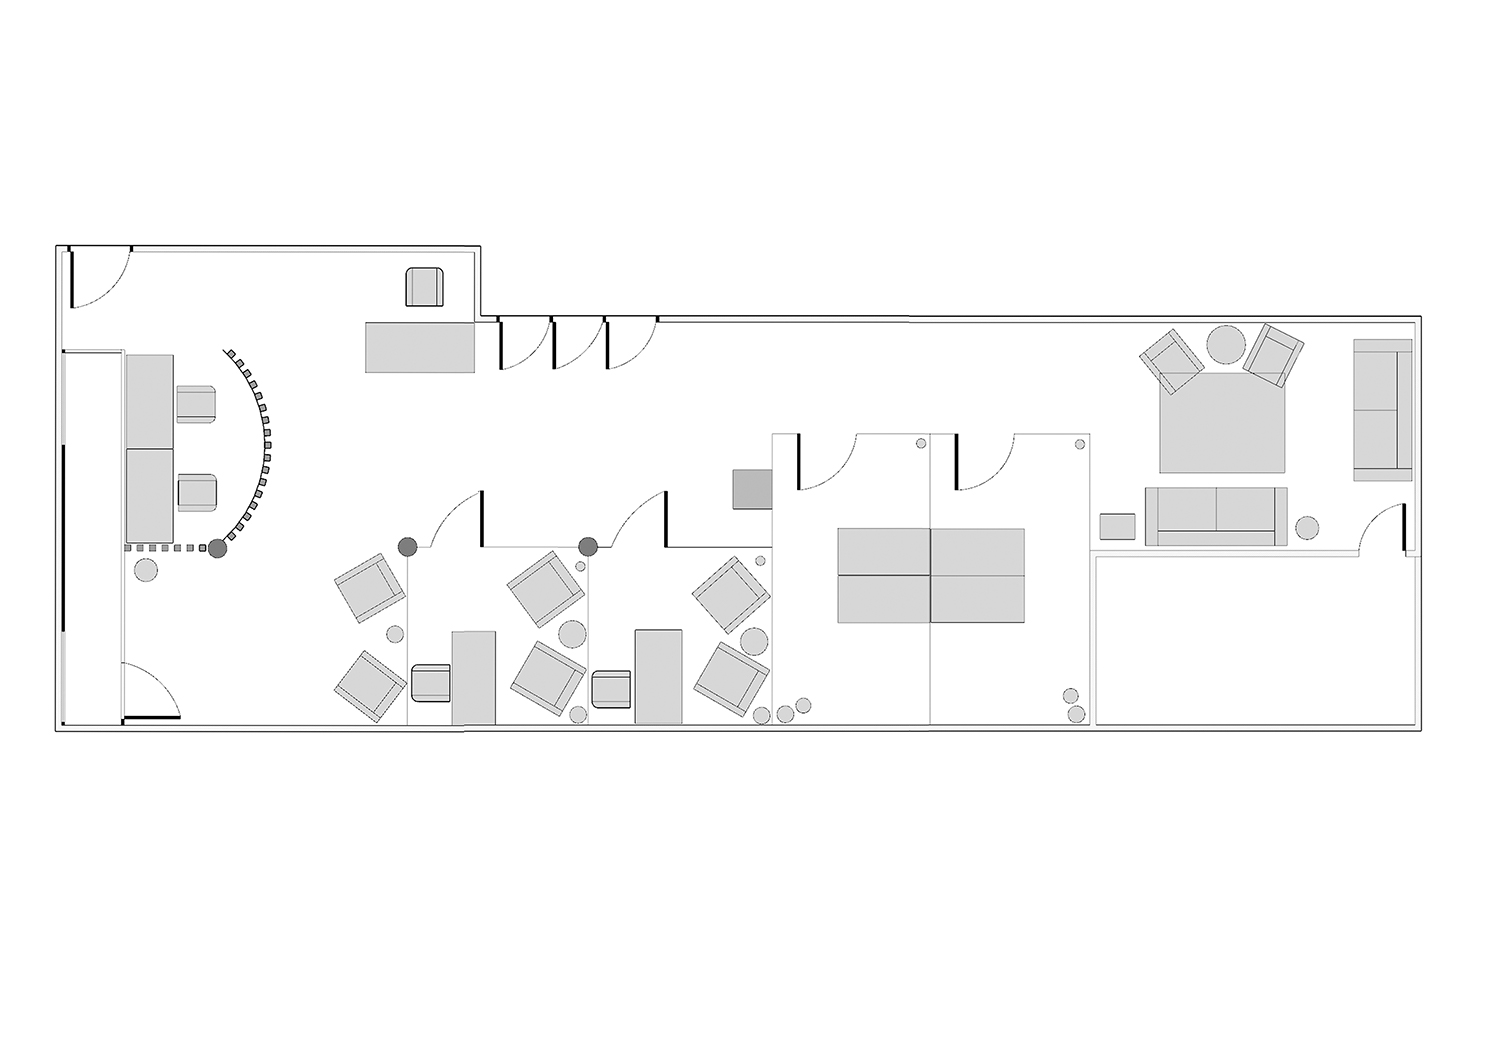 A scale floorplan with the proposed new layout.